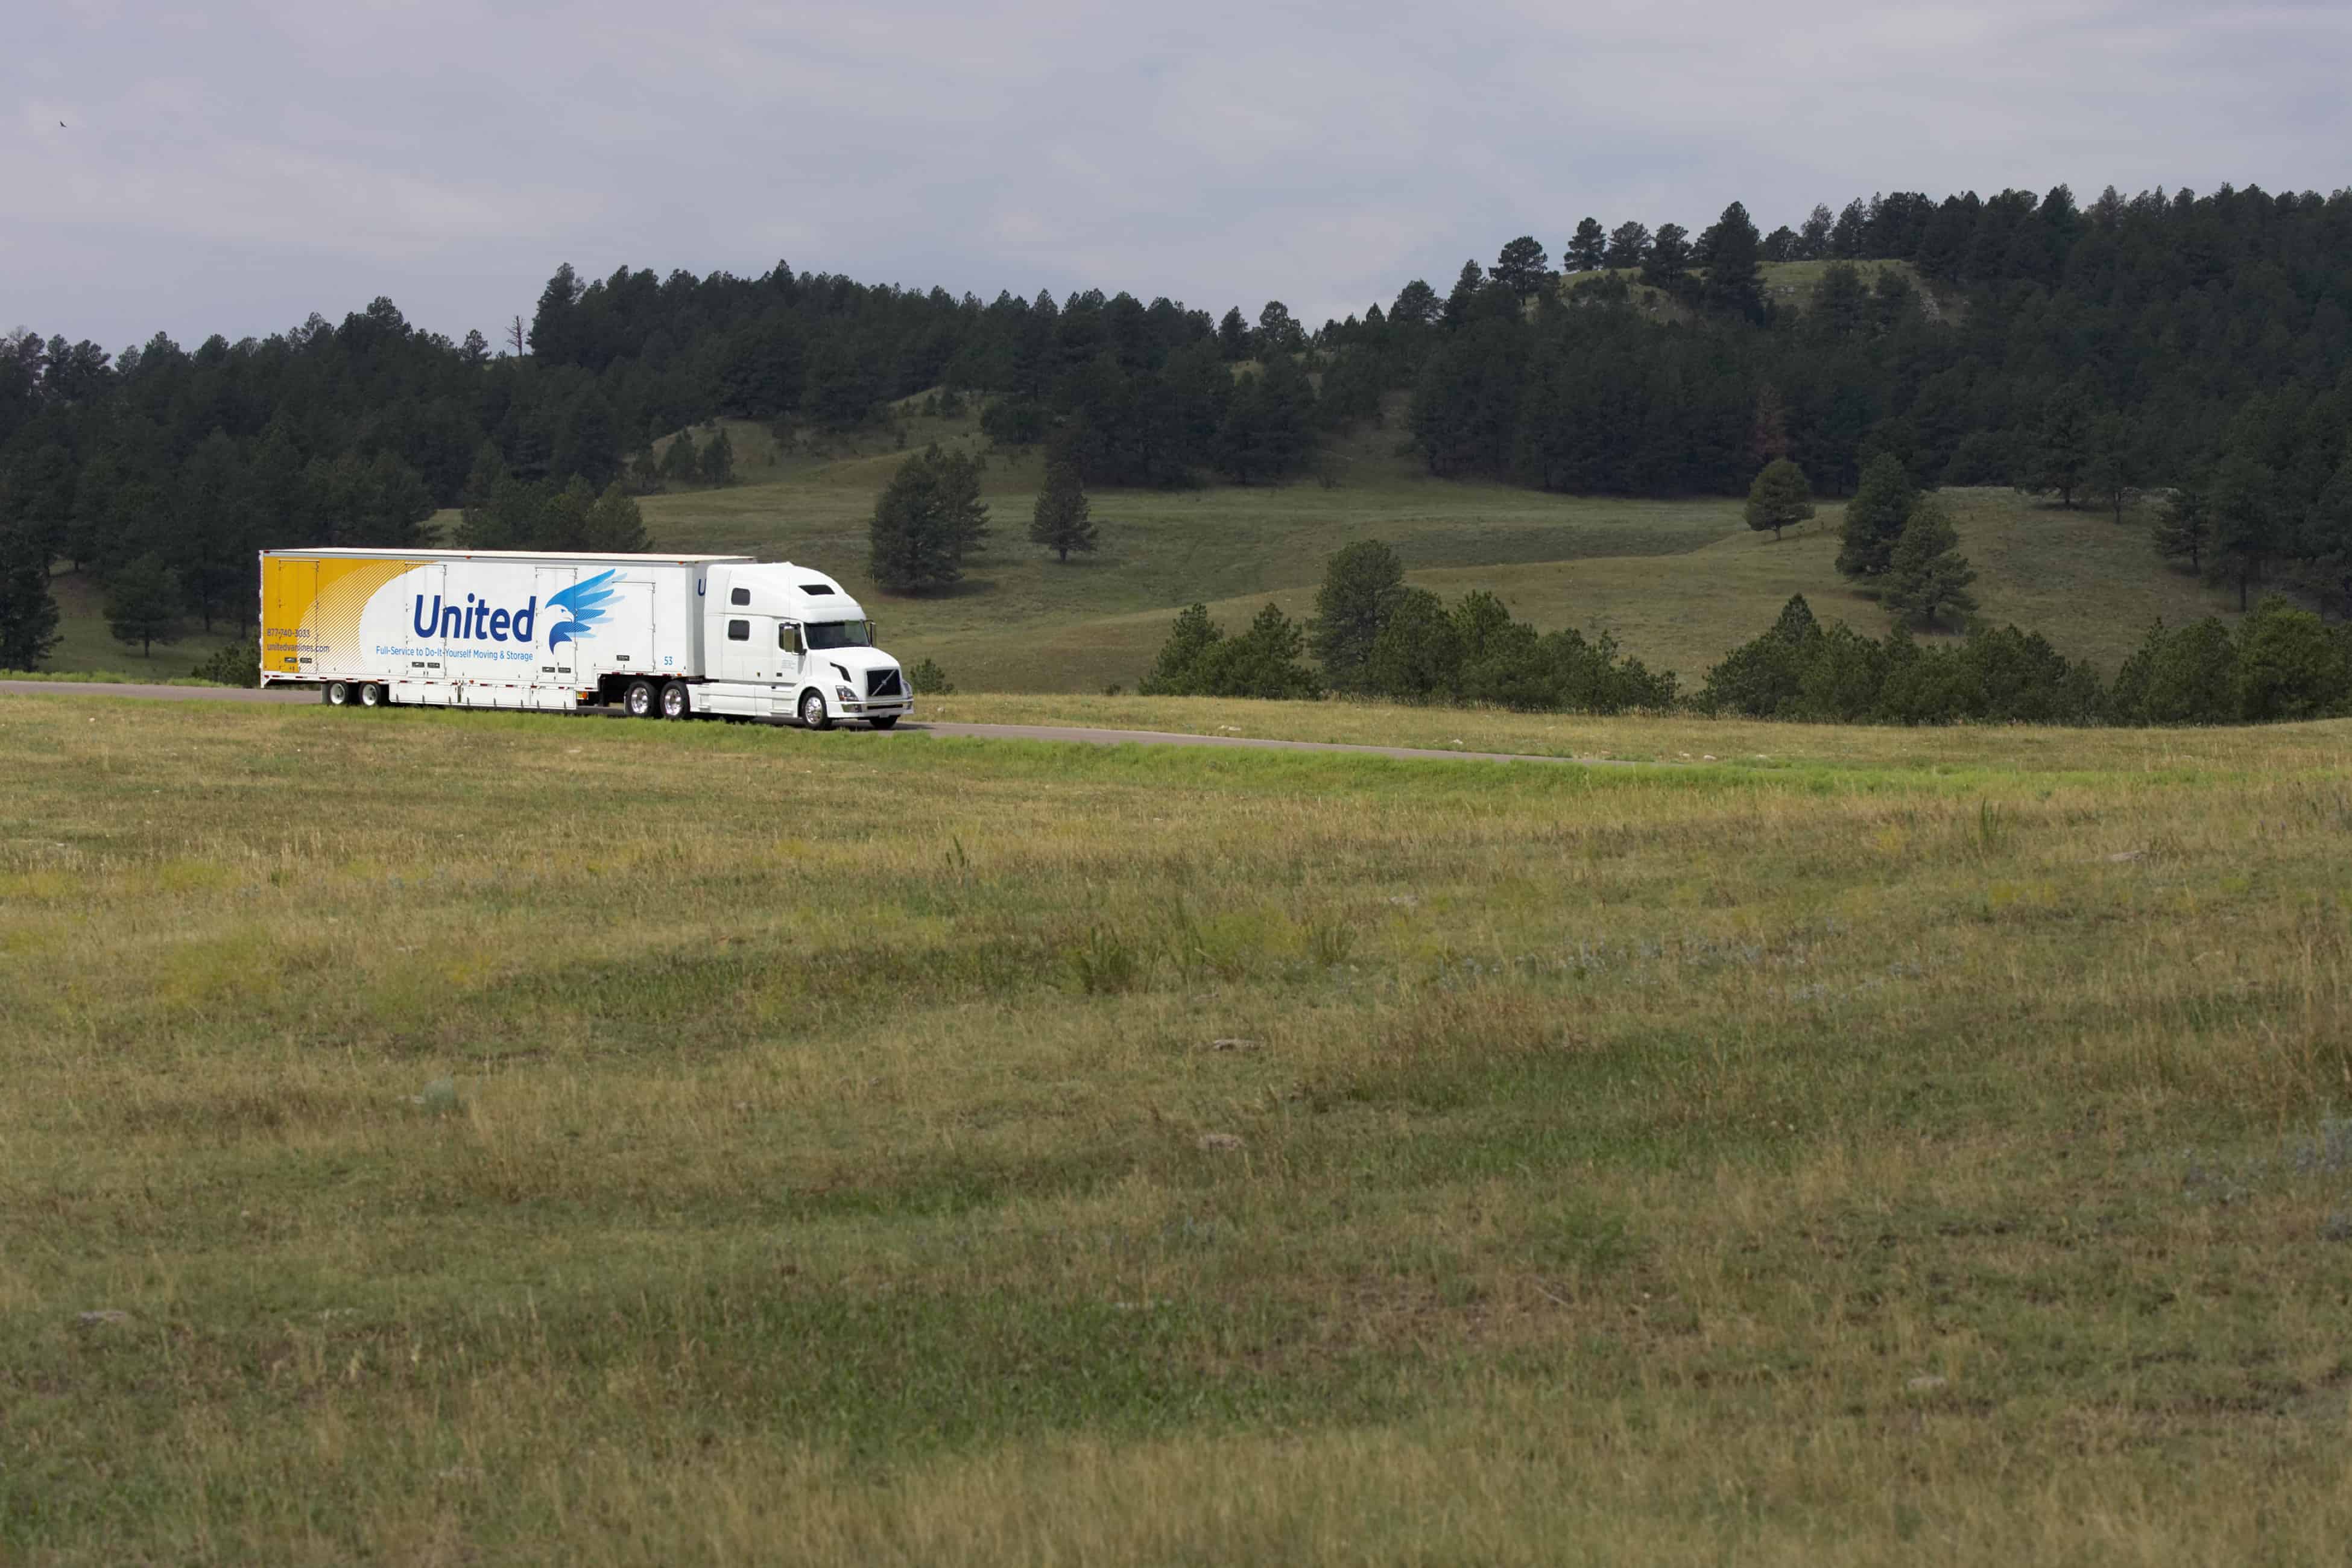 United moving truck on a rural road with trees and rolling hills in the background